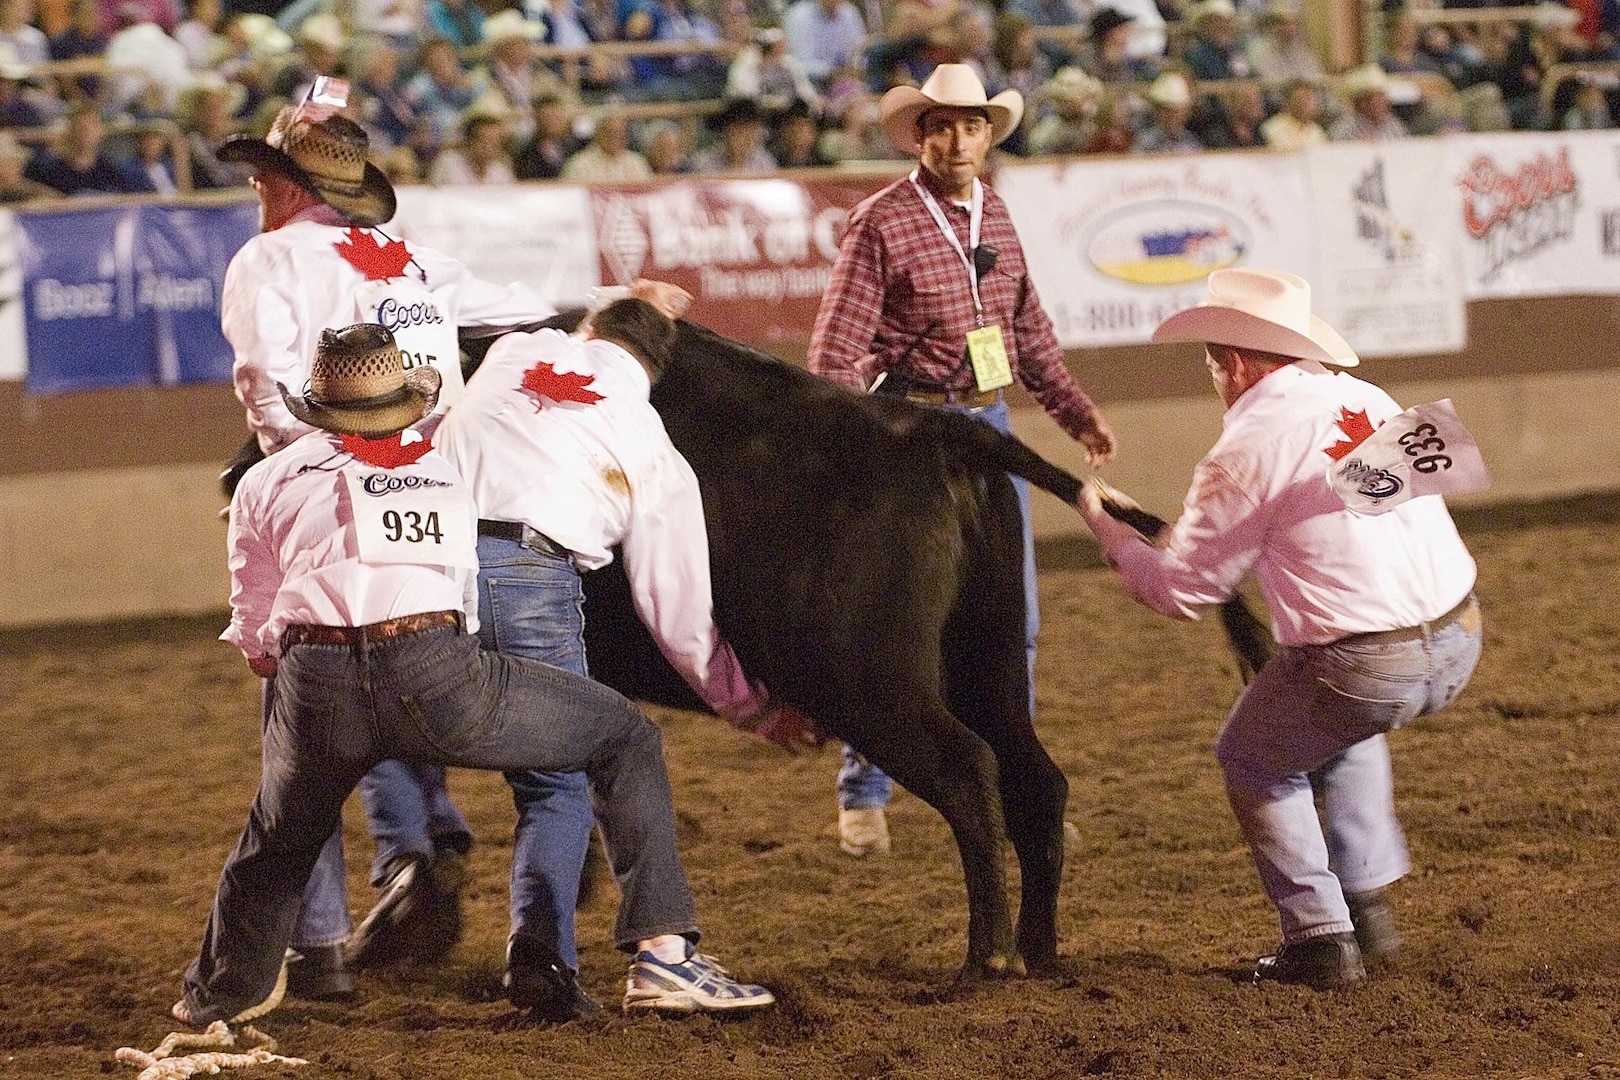 The "Canadian Milkers" – a wild cow milking team made up of personnel assigned to North American Aerospace Defense Command – won first place in a preliminary round at the Pikes Peak or Bust Rodeo in Colorado Springs, Colo., July 12, 2007. The team returned to the rodeo July 15 to compete for overall honors in the finals, but was out-milked by a team from Fort Carson, Colo. The rodeo is a charitable organization dedicated to funding programs and services that benefit local military personnel and their families. Photo by Sgt. 1st Class Gail Braymen 